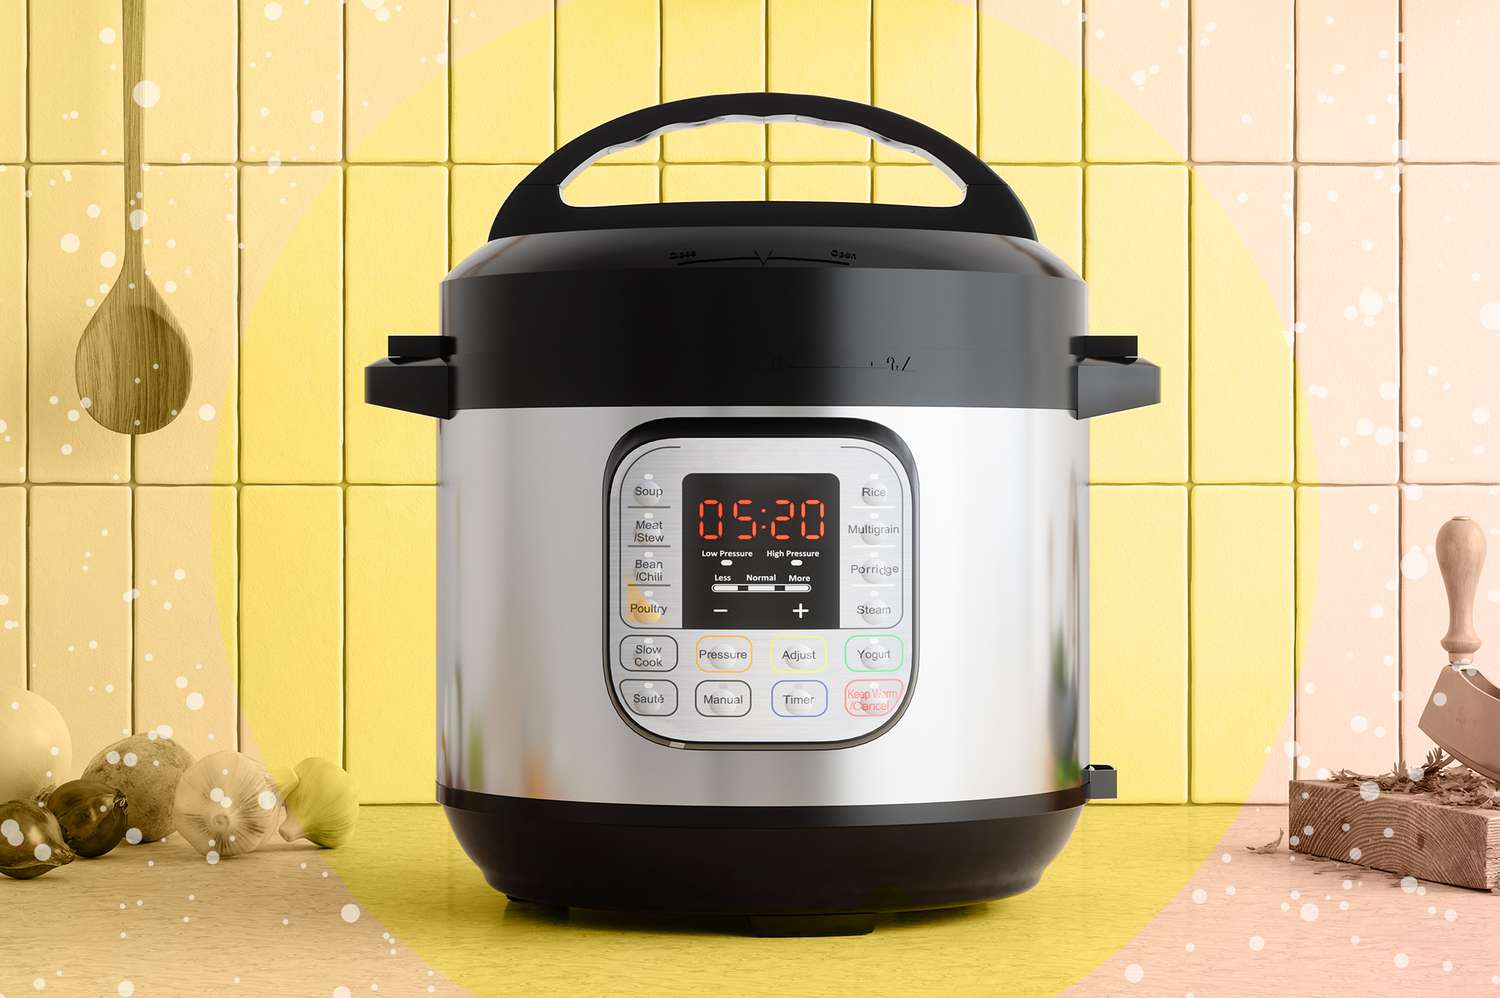 How To Set Up An Electric Pressure Cooker